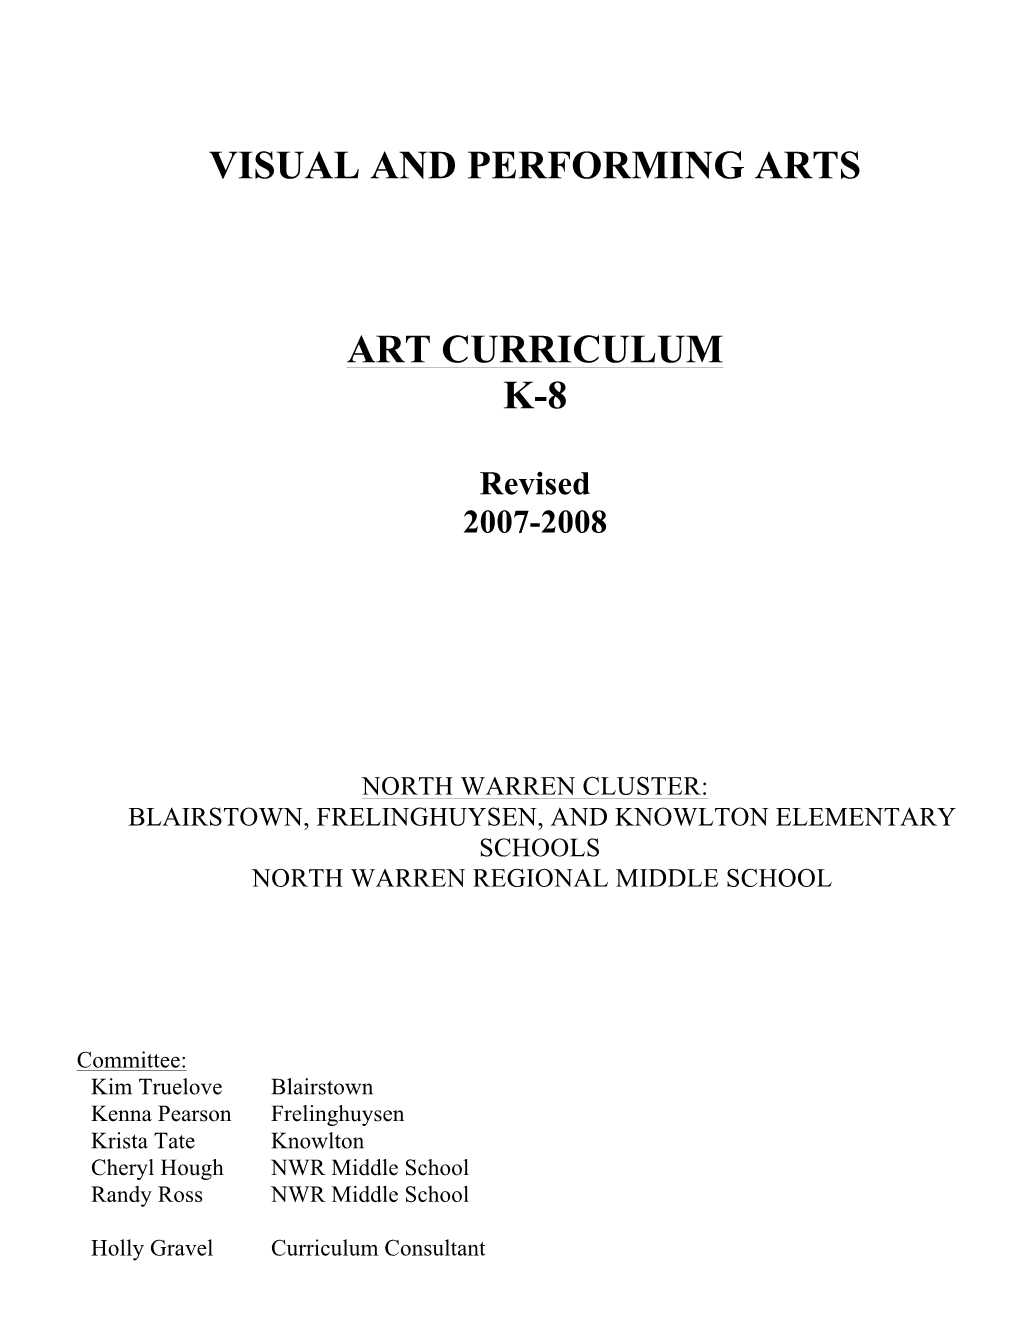 Visual and Performing Arts Art Curriculum